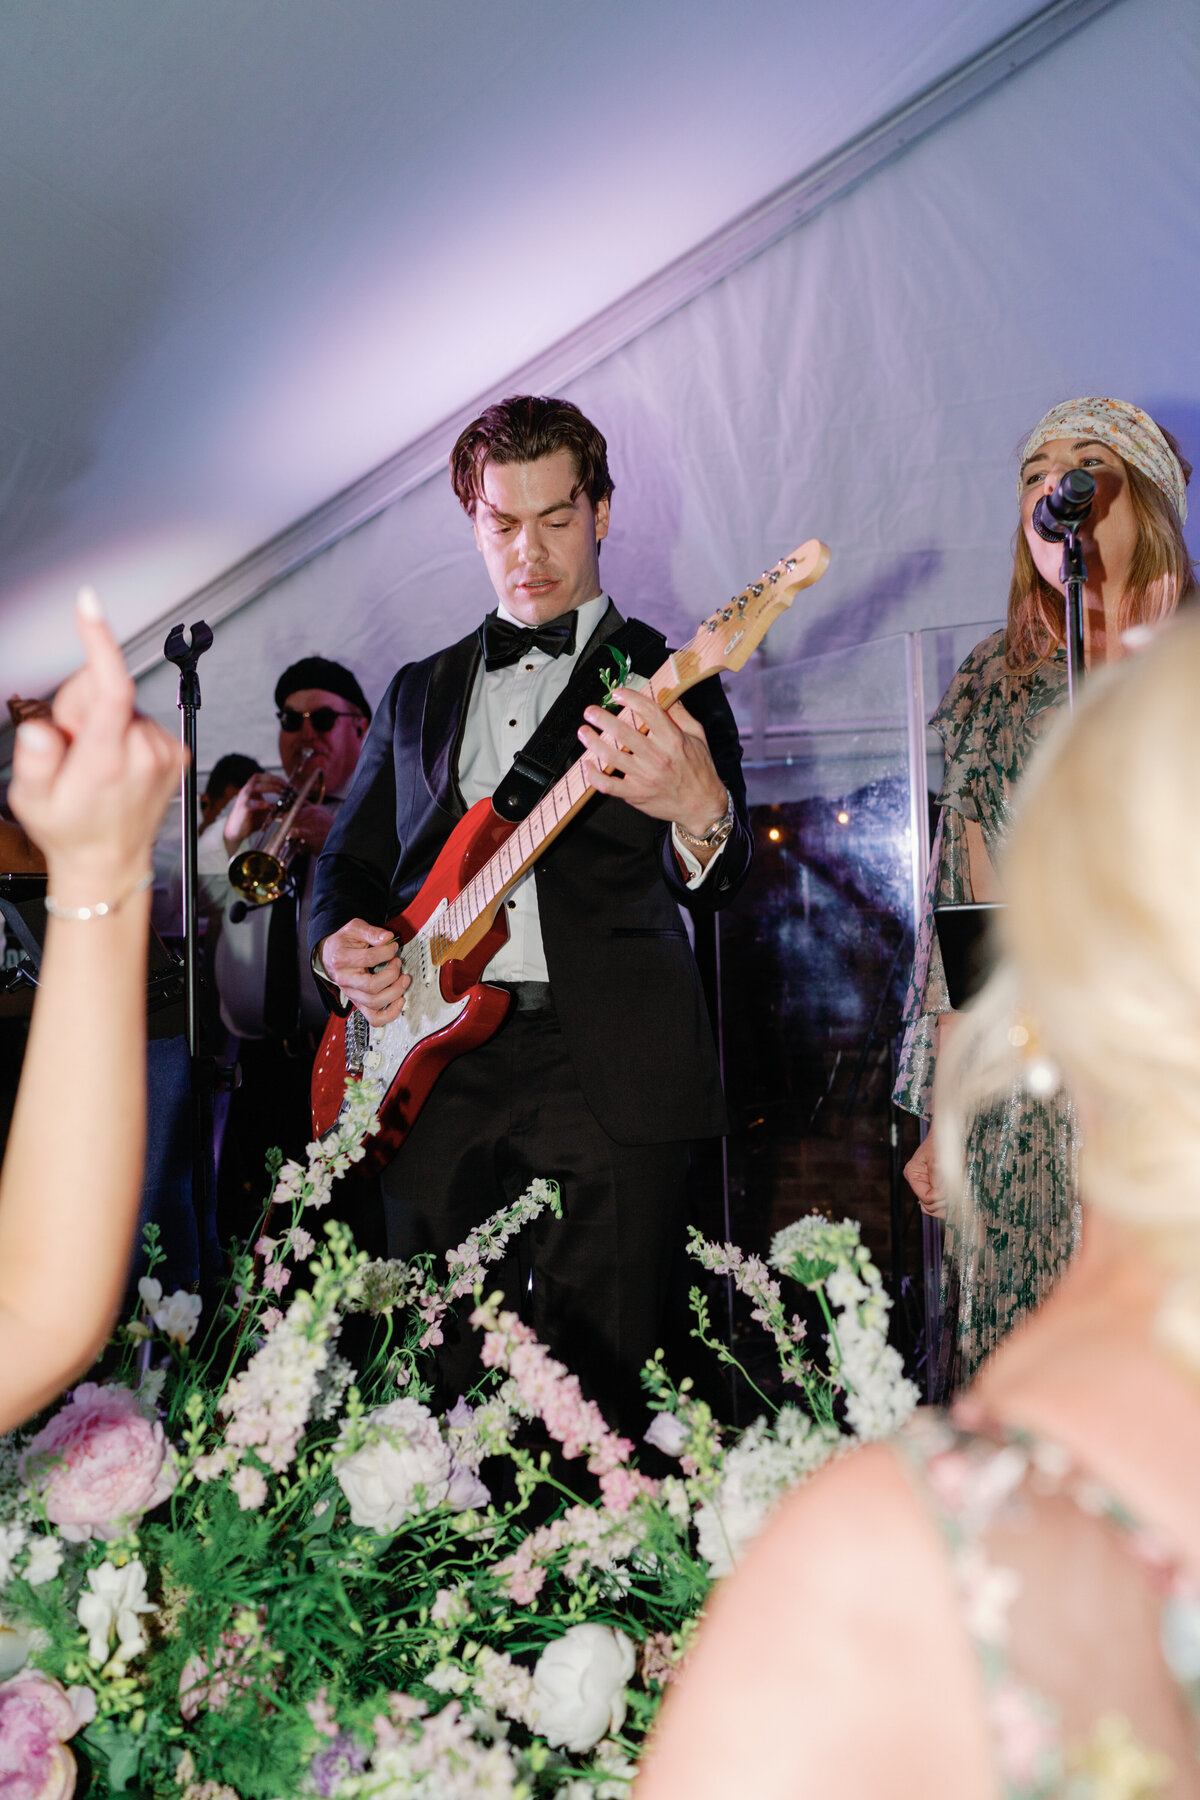 Groom live guitar performance with mom singing vocals at William Aiken House wedding reception in Charleston, SC.